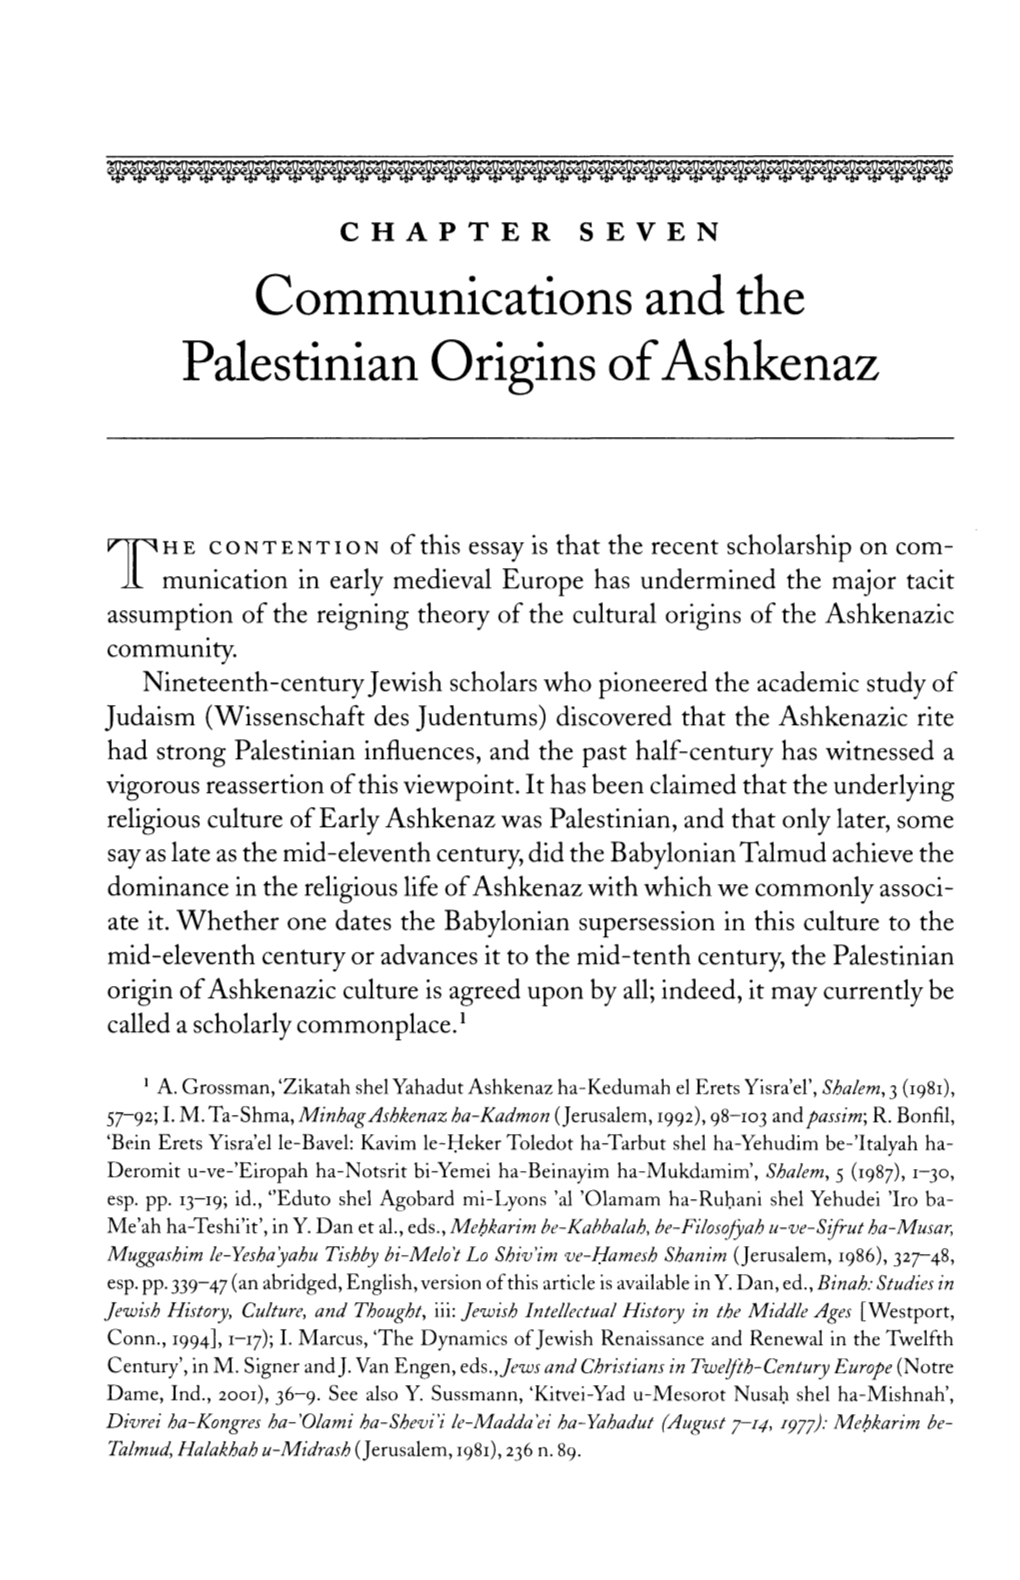 Communications and the Palestinian Origins of Ashkenaz